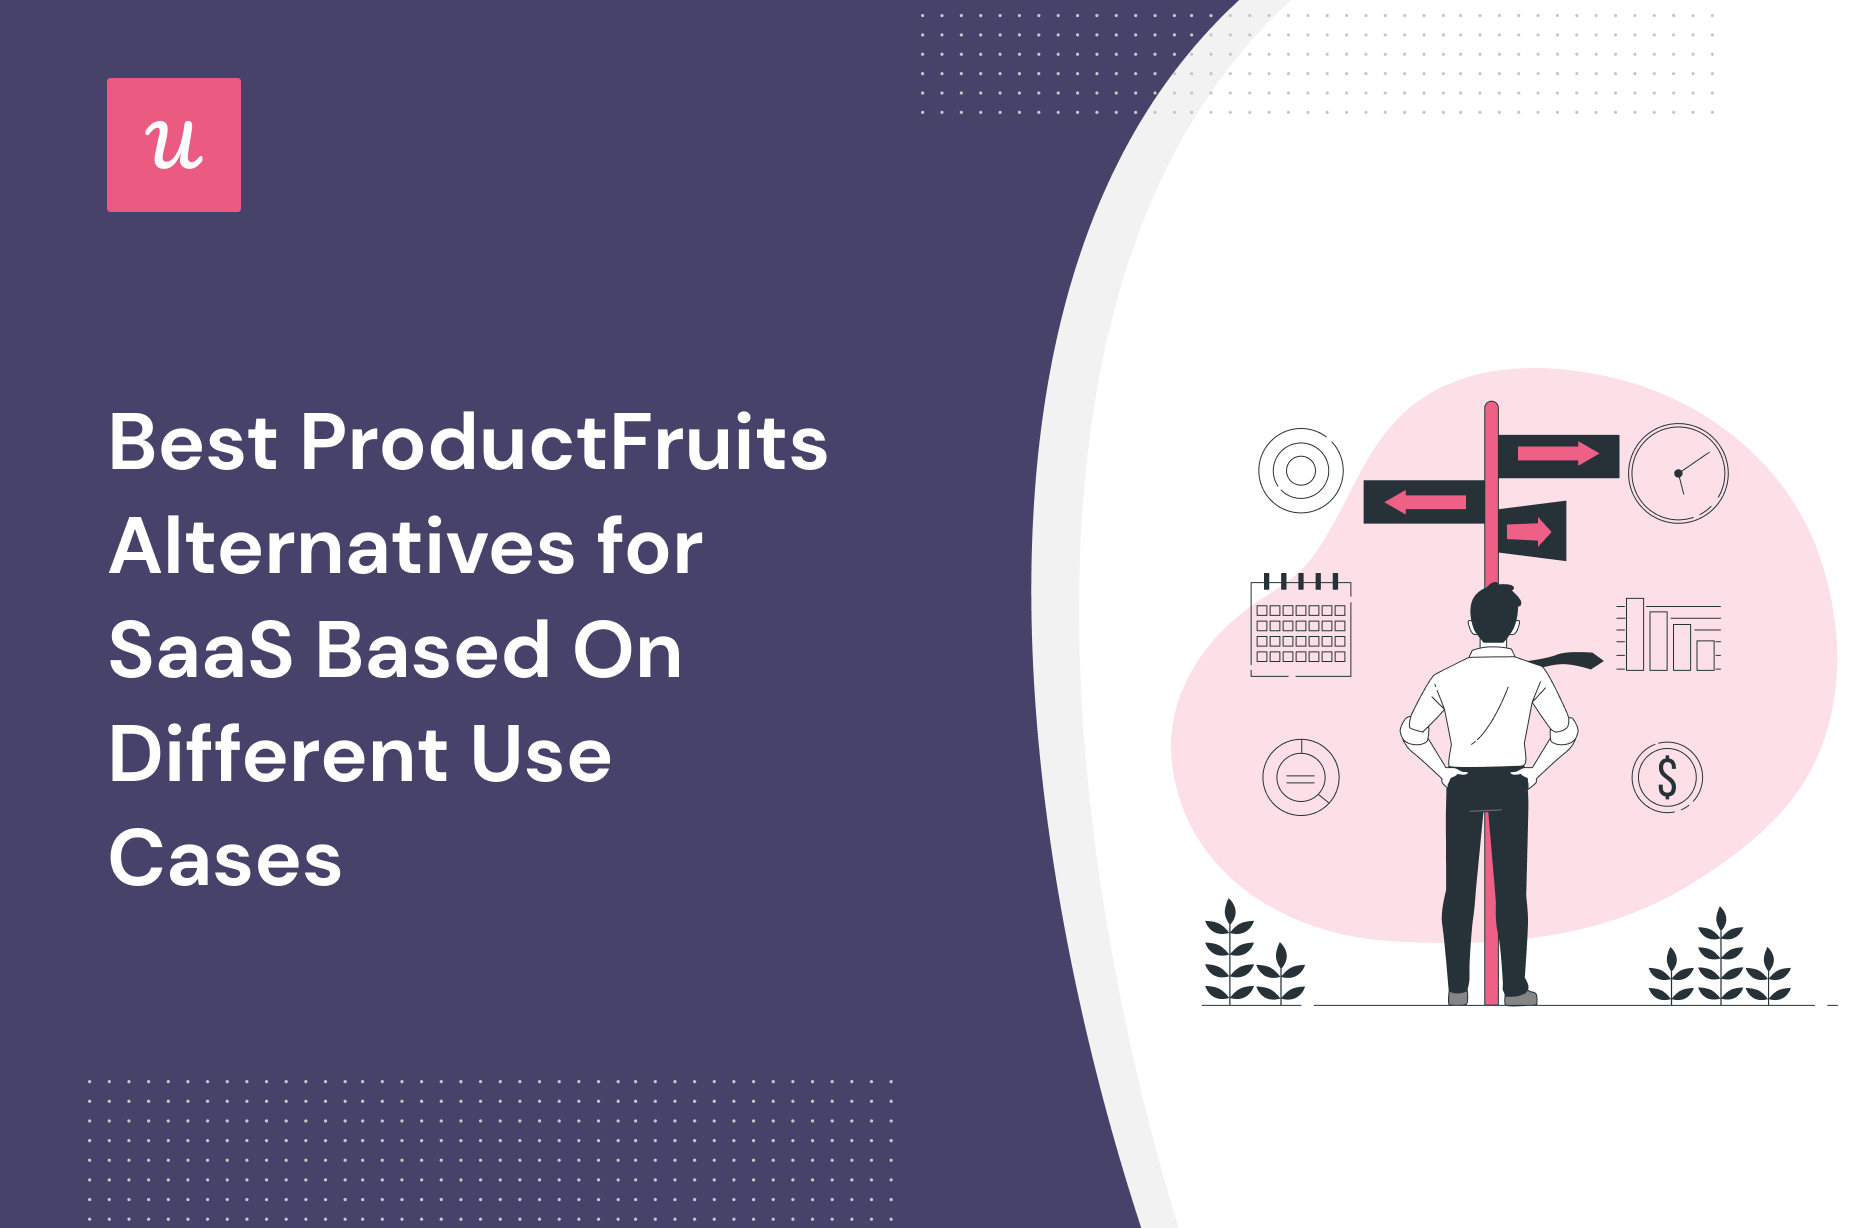 Best ProductFruits Alternatives for SaaS Based On Different Use Cases